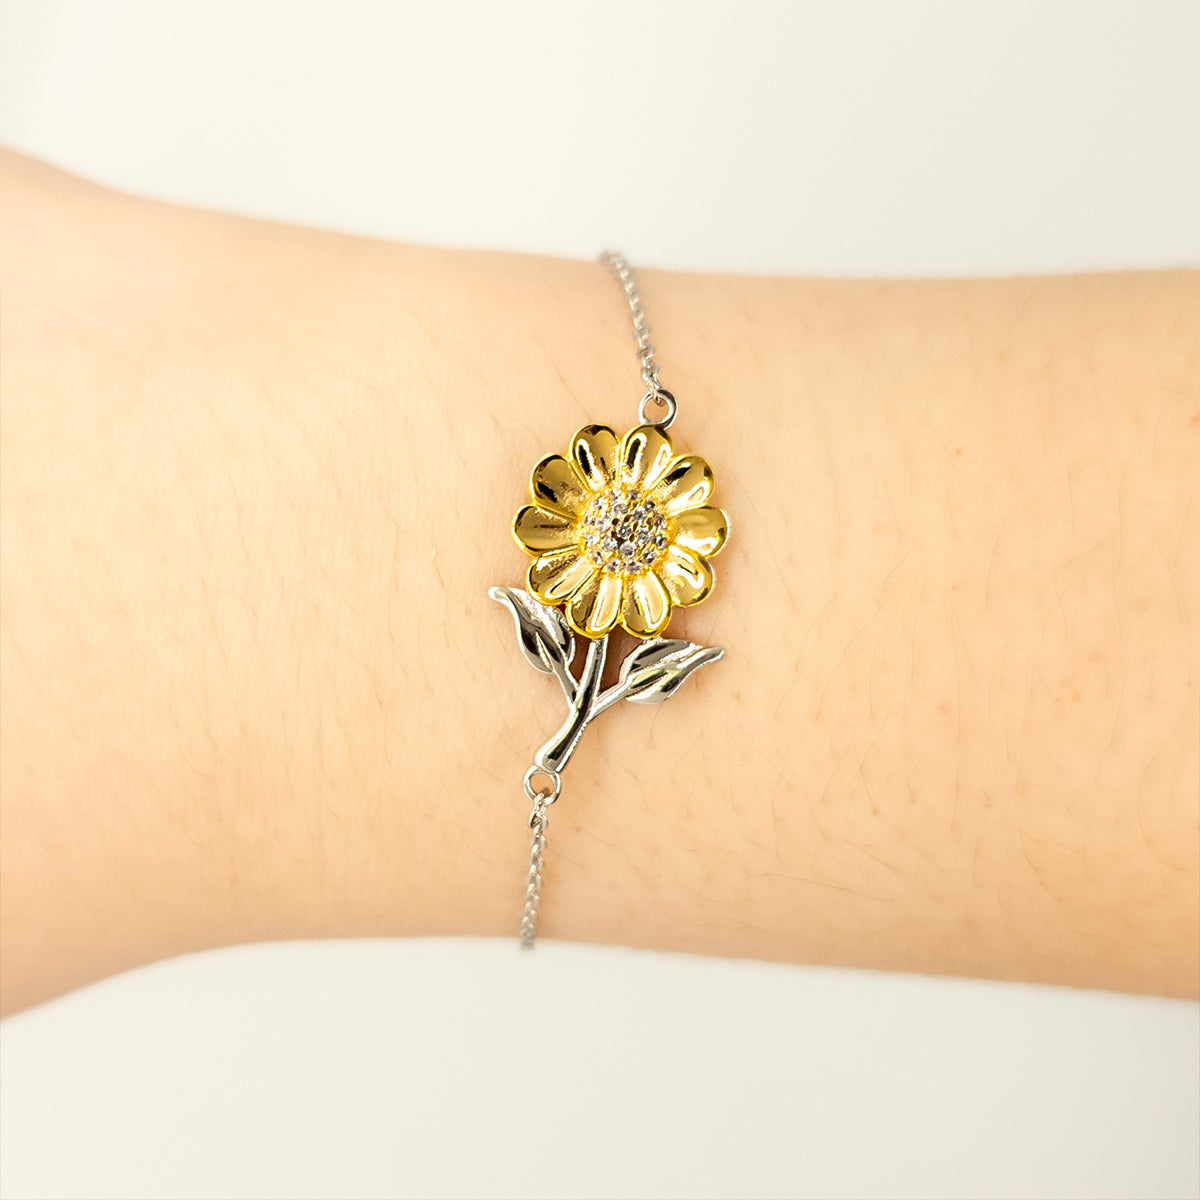 Goddad Sunflower Bracelet Engraved Special Place in Heart Inspiration Graduation Gift for Him and Her